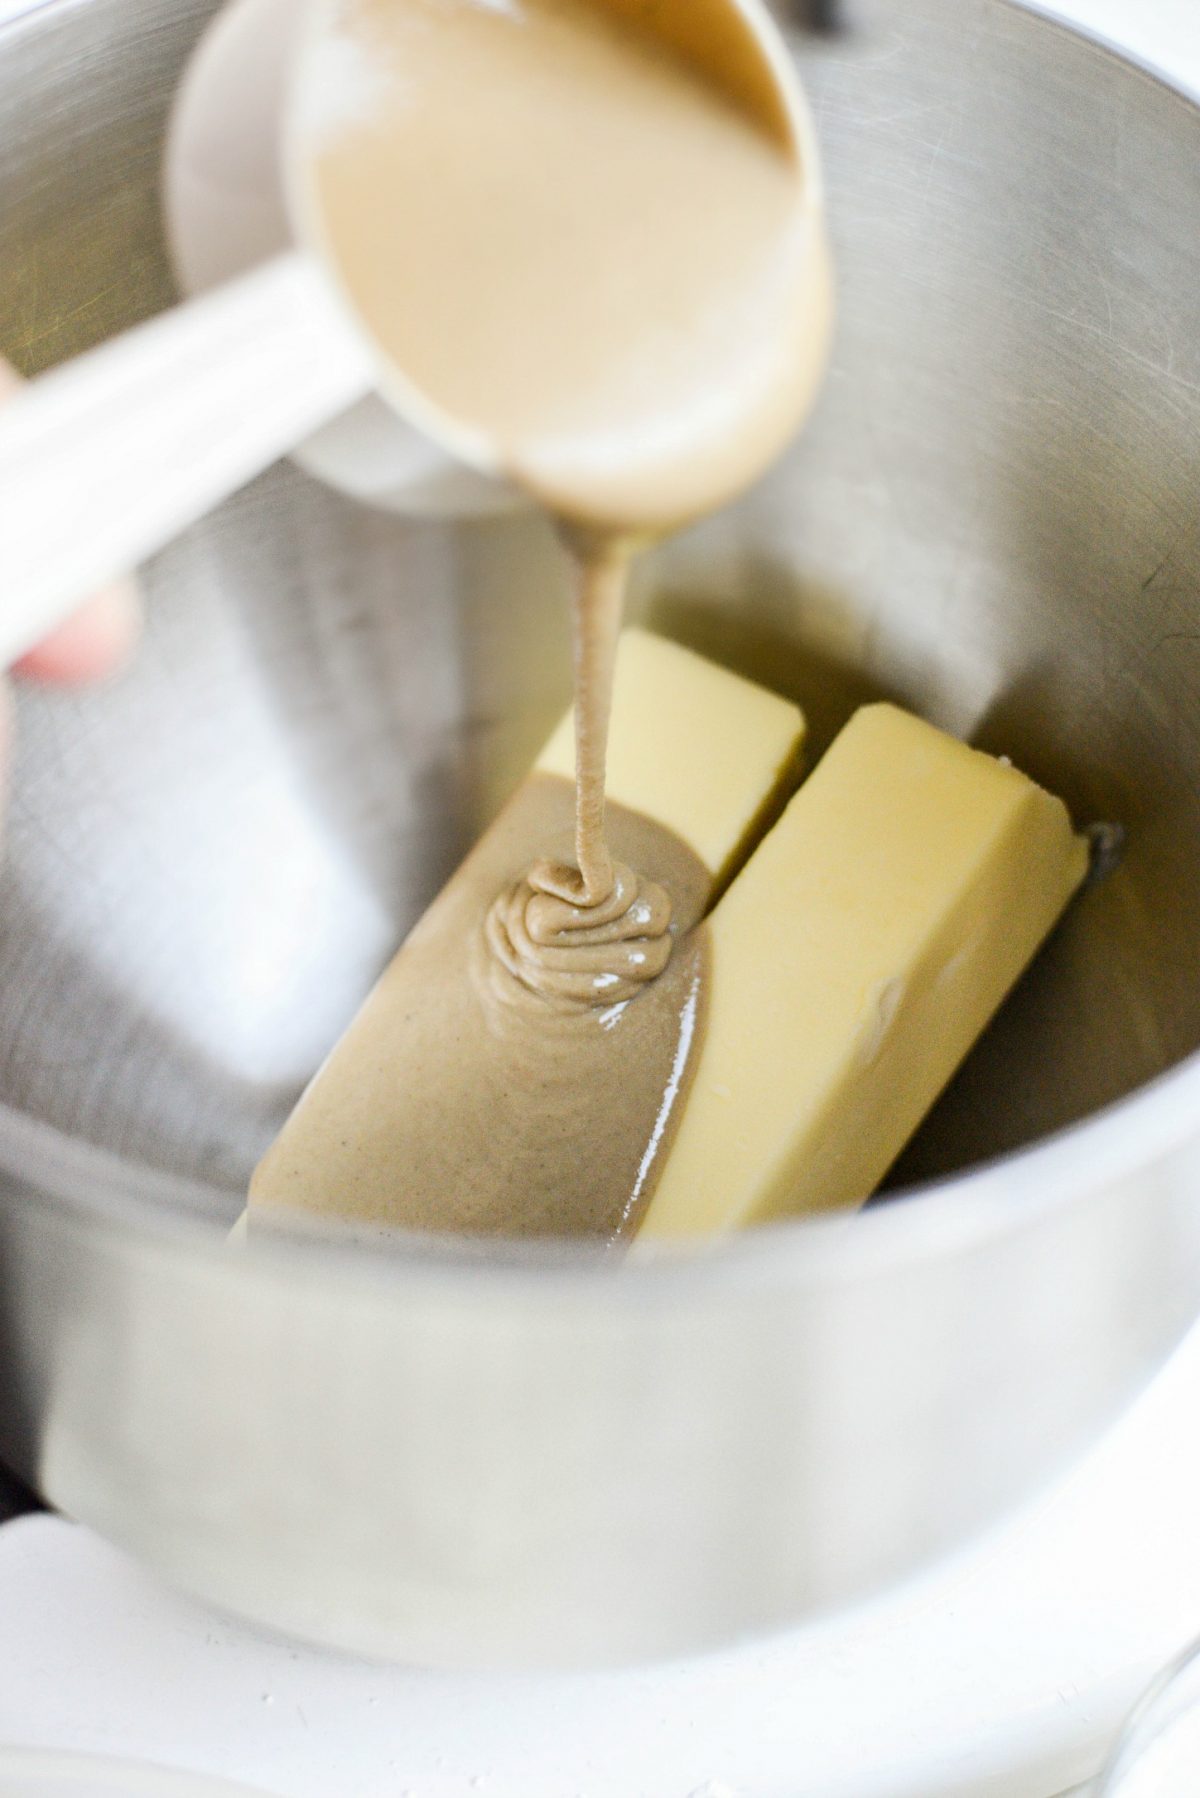 Add butter and tahini into the bowl of your stand mixer